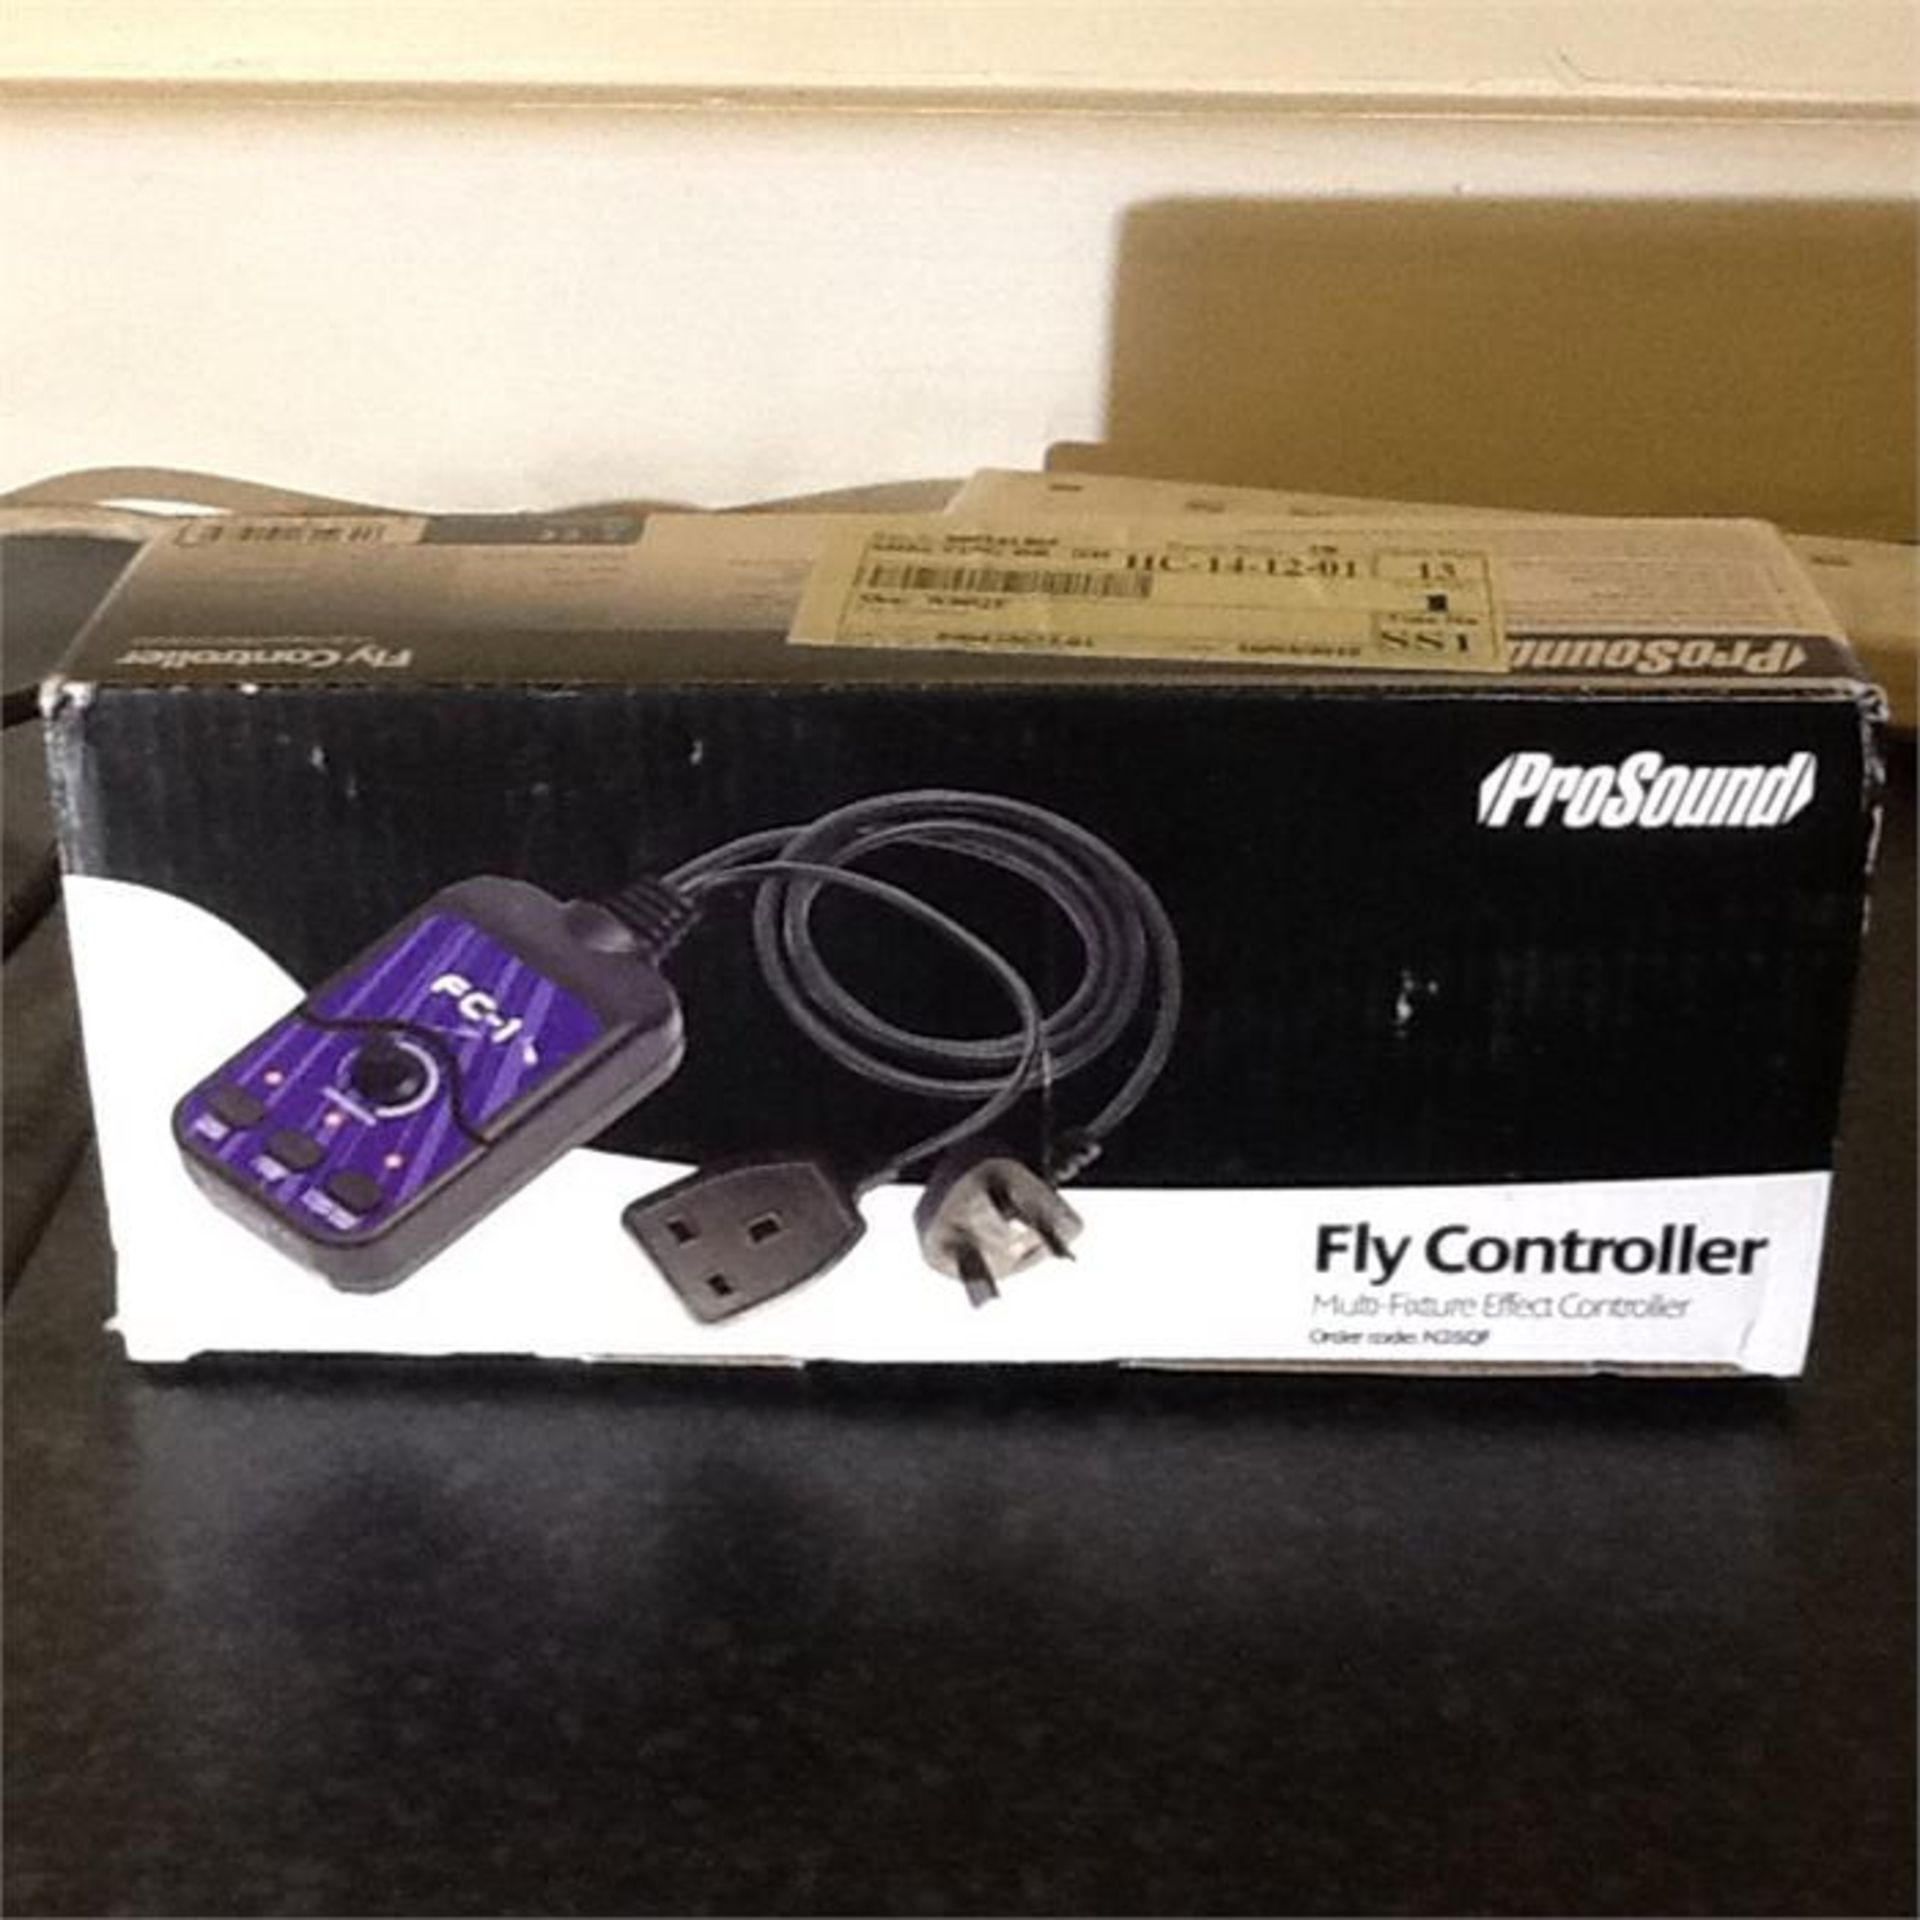 Prosound fly controller. Boxed - Image 5 of 5